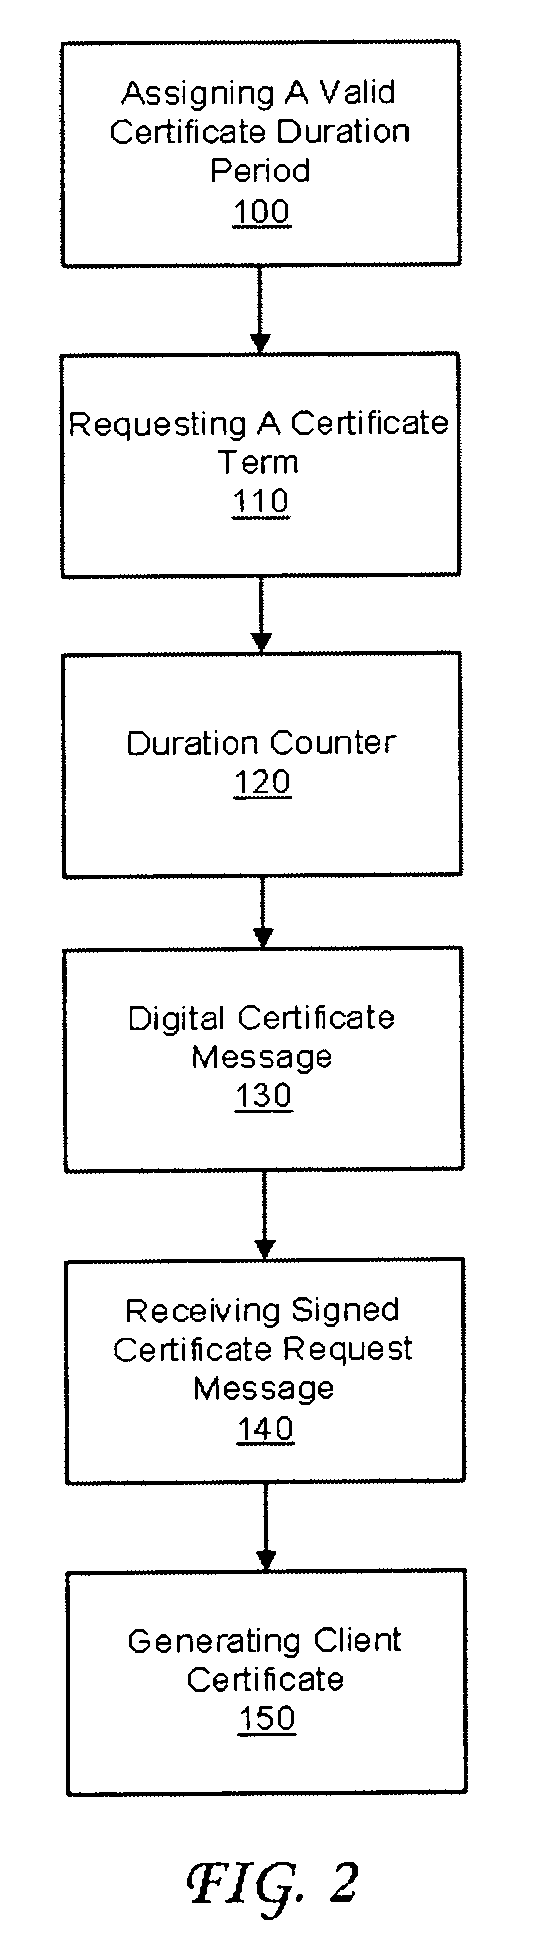 System and method for configuring a valid duration period for a digital certificate